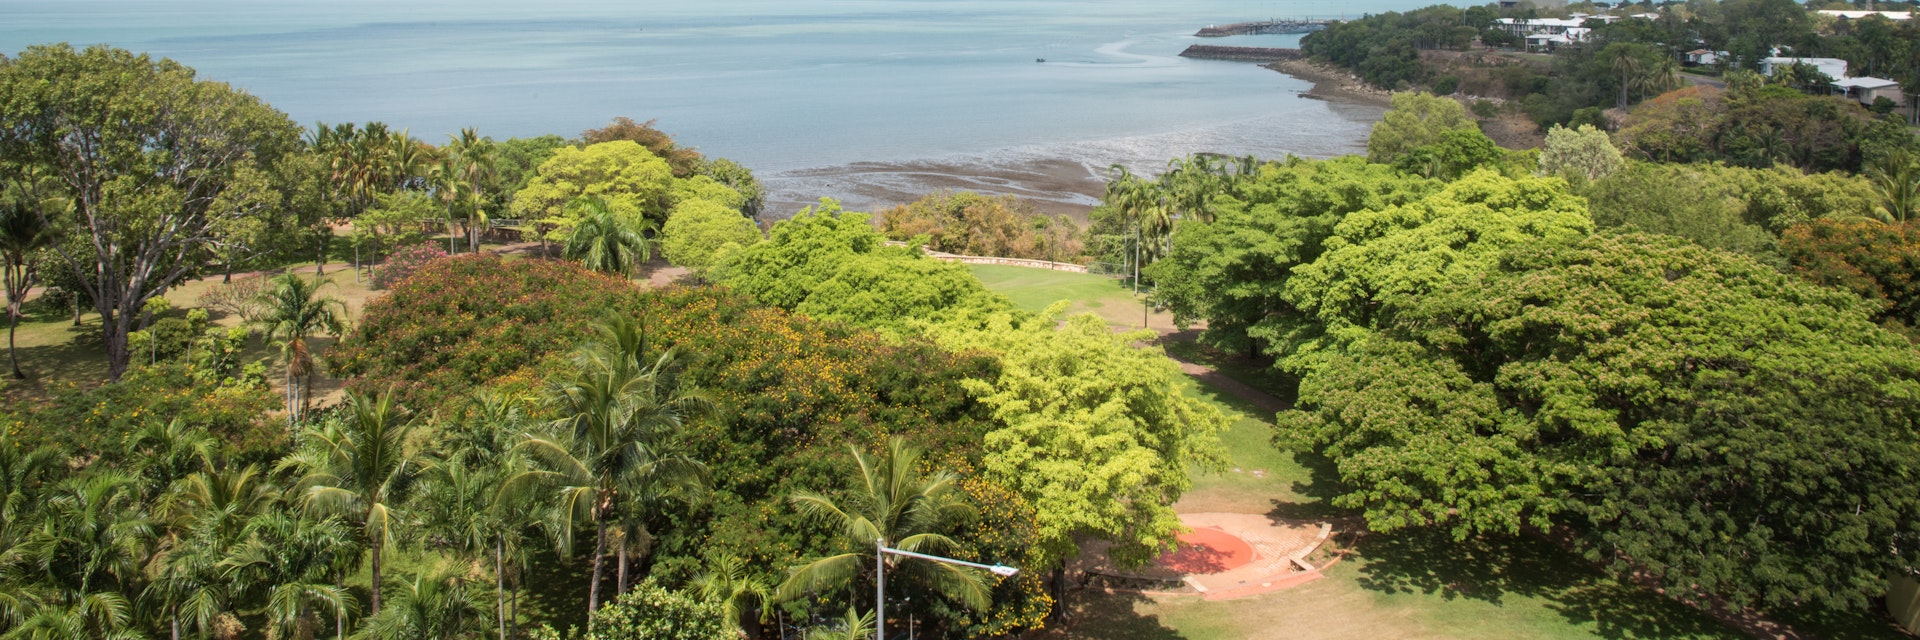 October 6, 2017: High angle view of Bicentennial Park in Darwin.